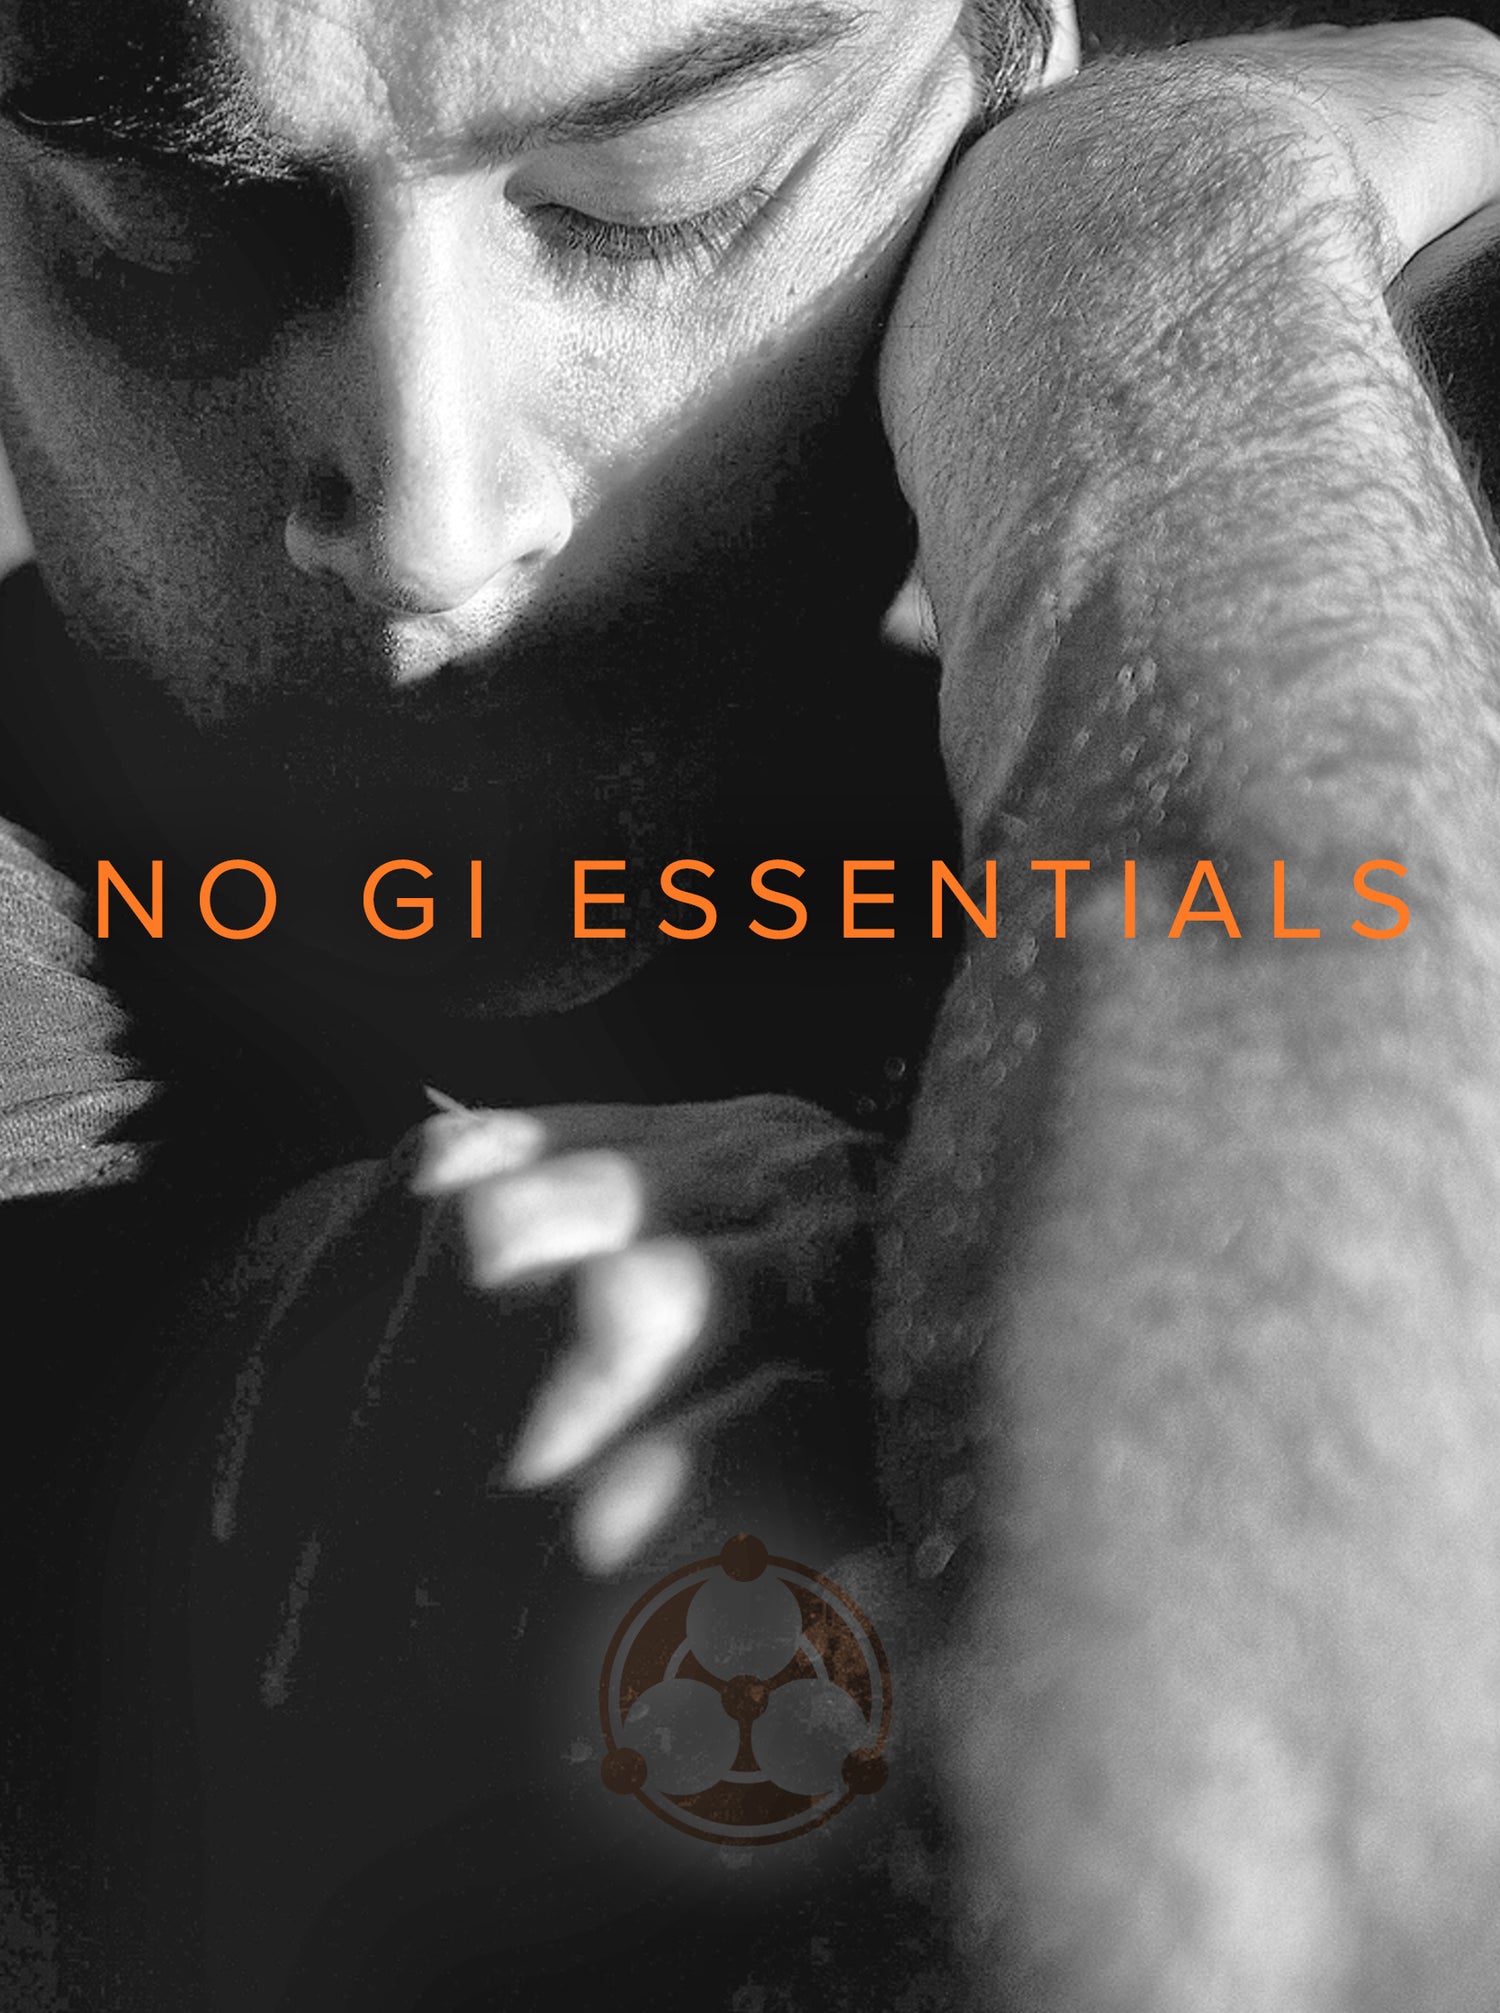 Submission Grappling: No Gi Essentials by Roy Dean (On Demand) - Budovideos